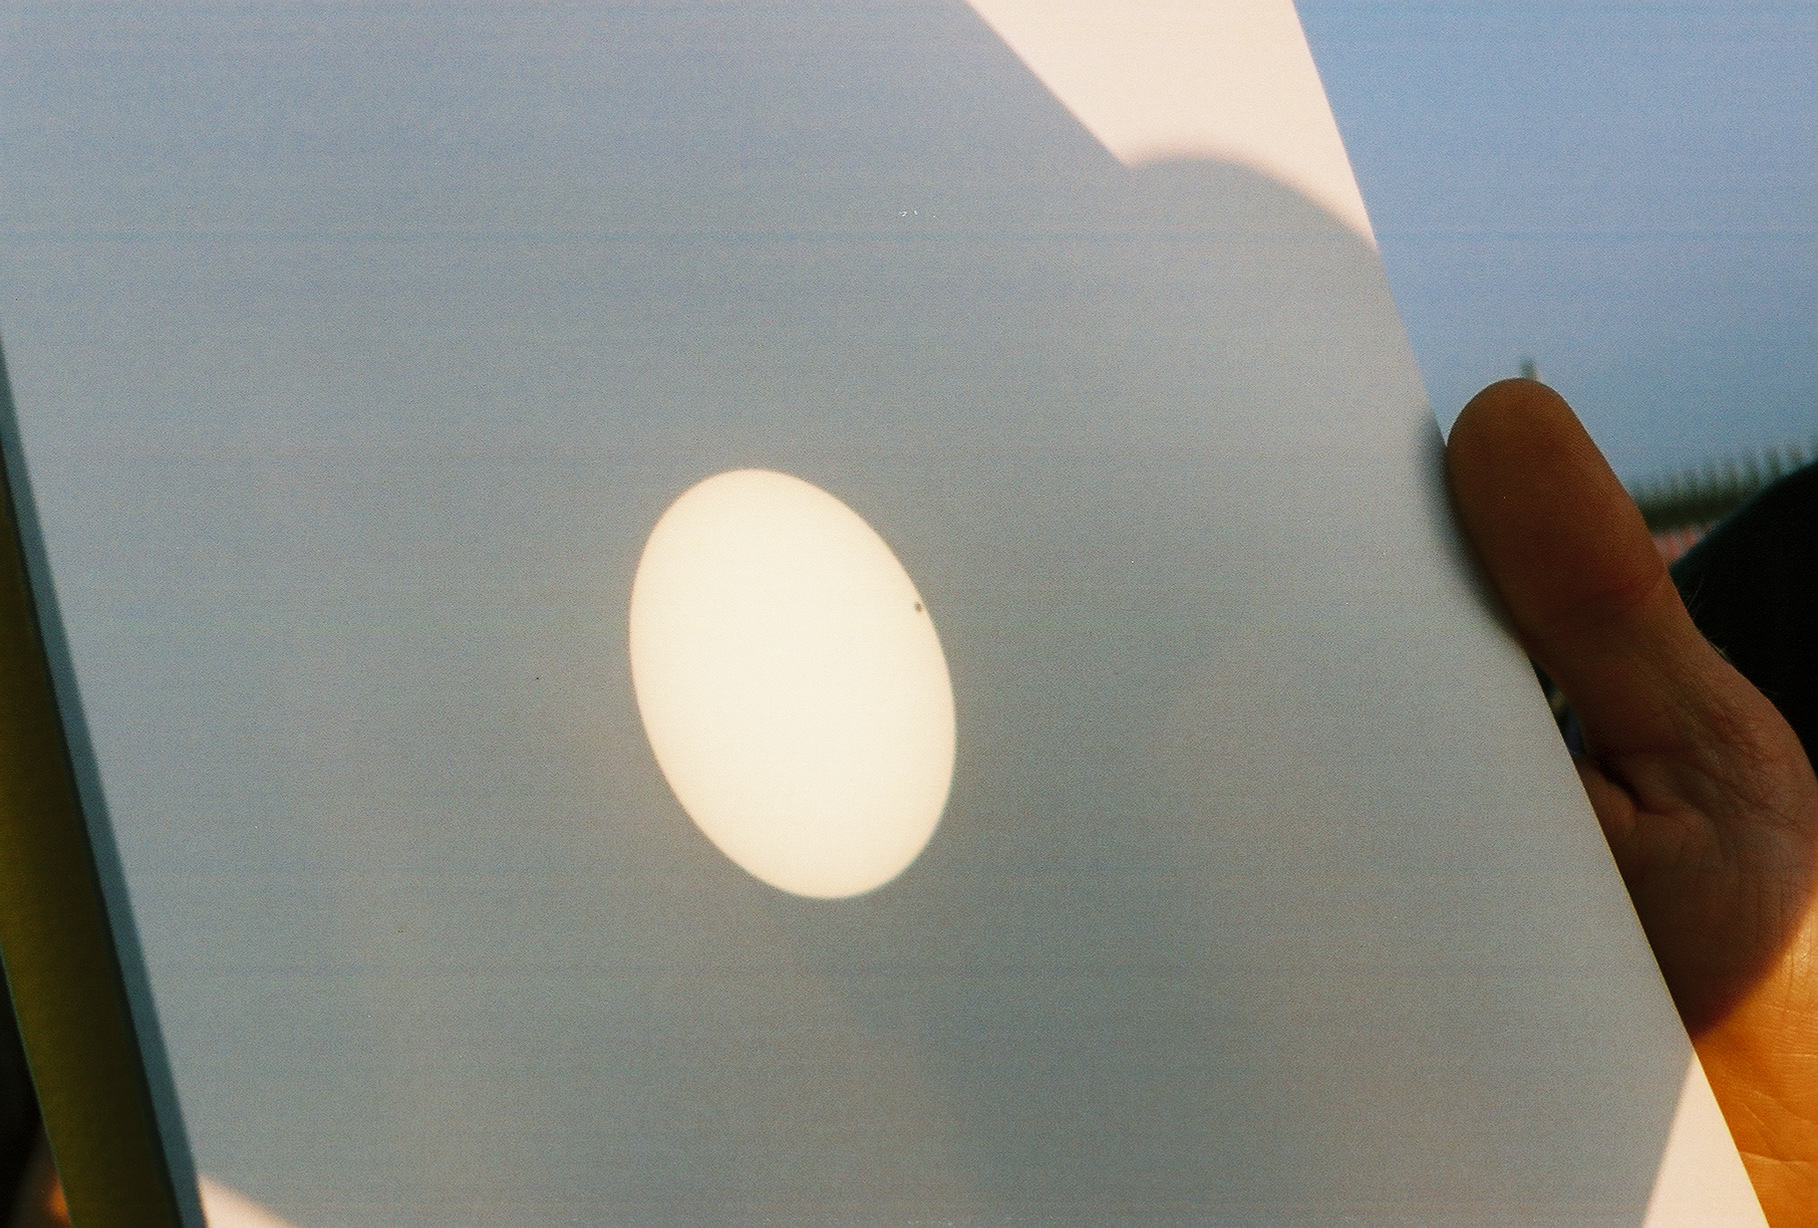 Transit of Venus image, projected on a white card